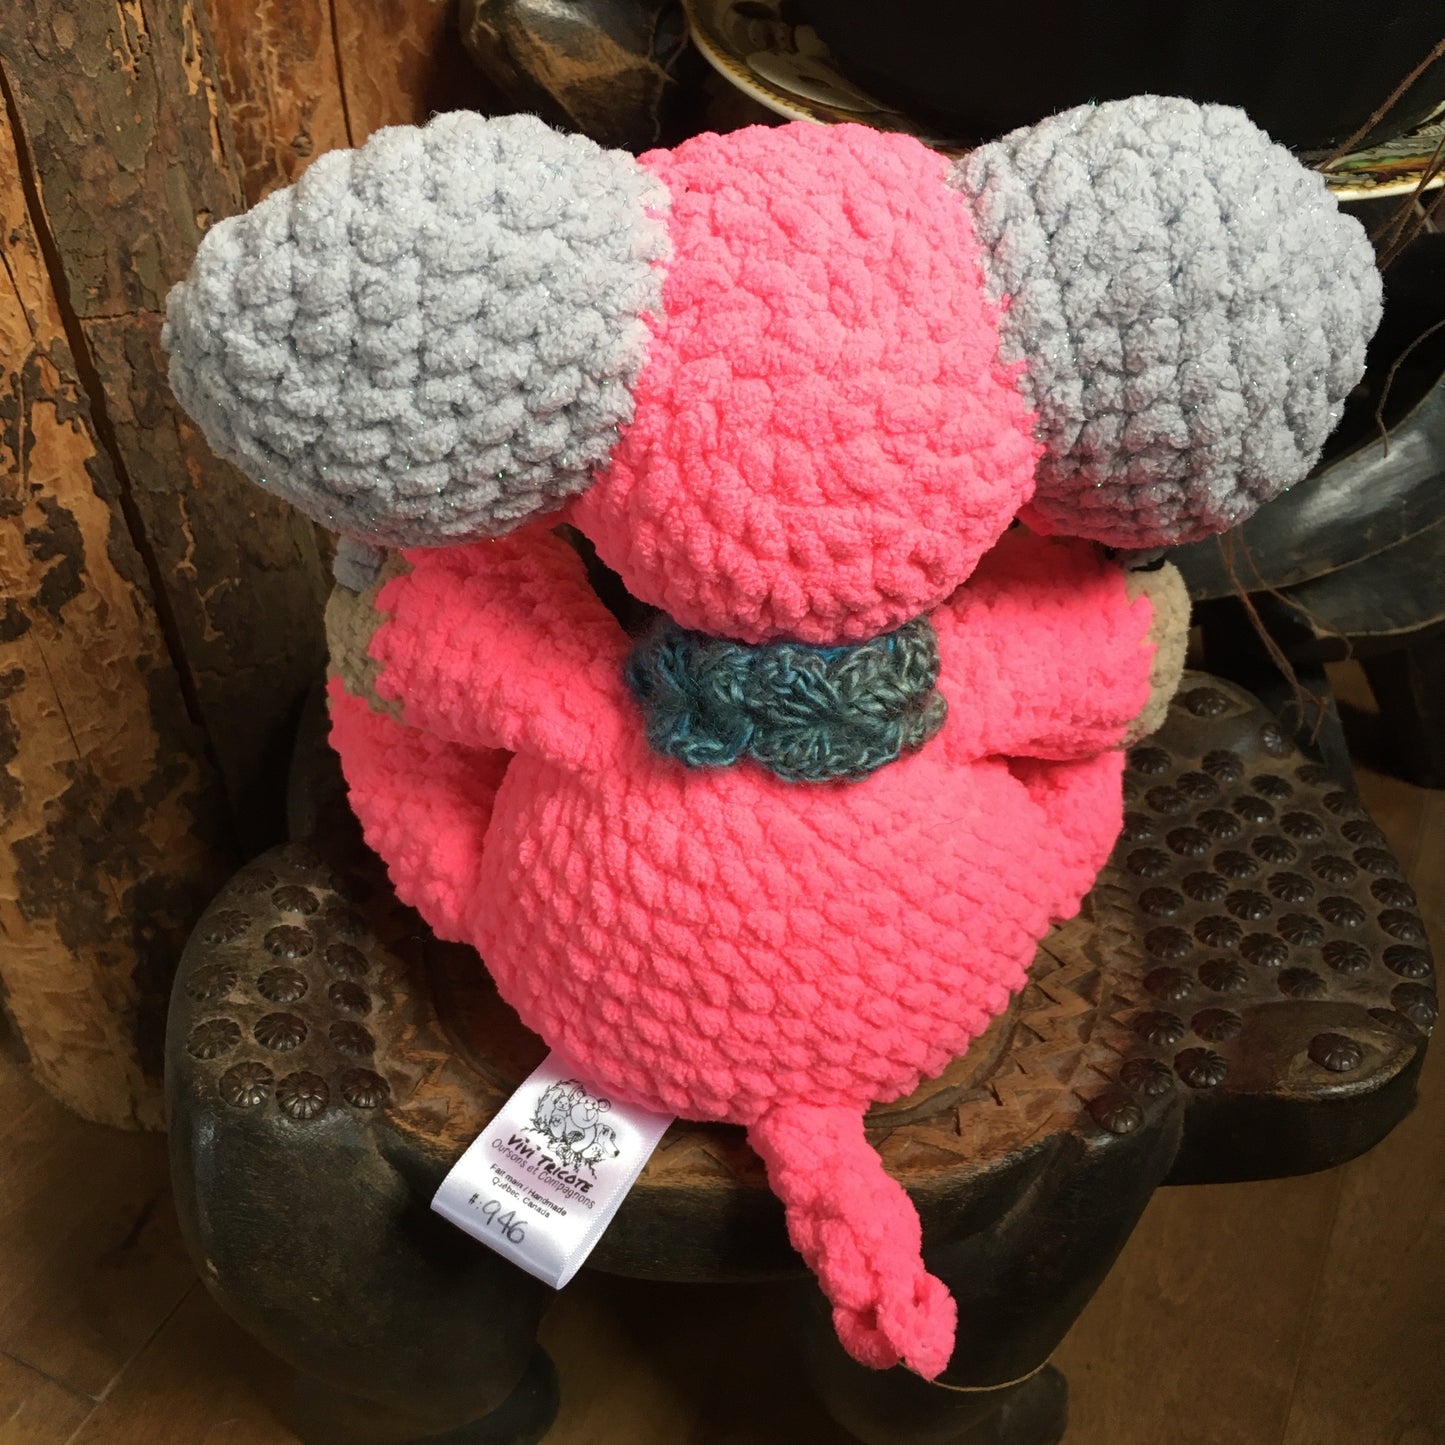 ANGELA THE PINK ELEPHANT with big belly, can be personalized as a BIRTH PLUSHIE